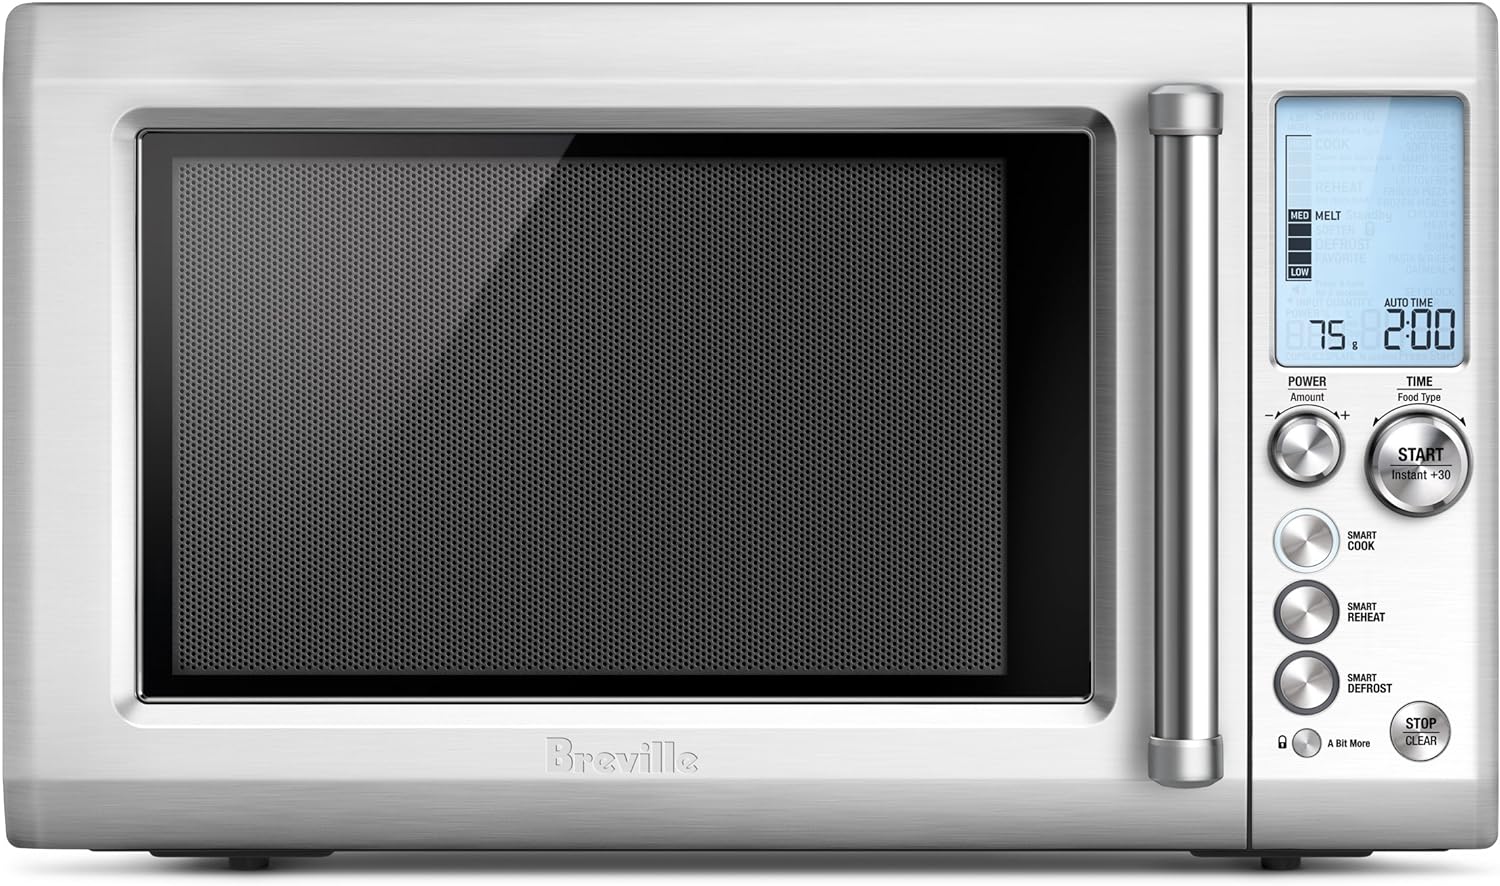 Premium Cooking Experience with the Breville BMO734XL Quick Touch Microwave Oven